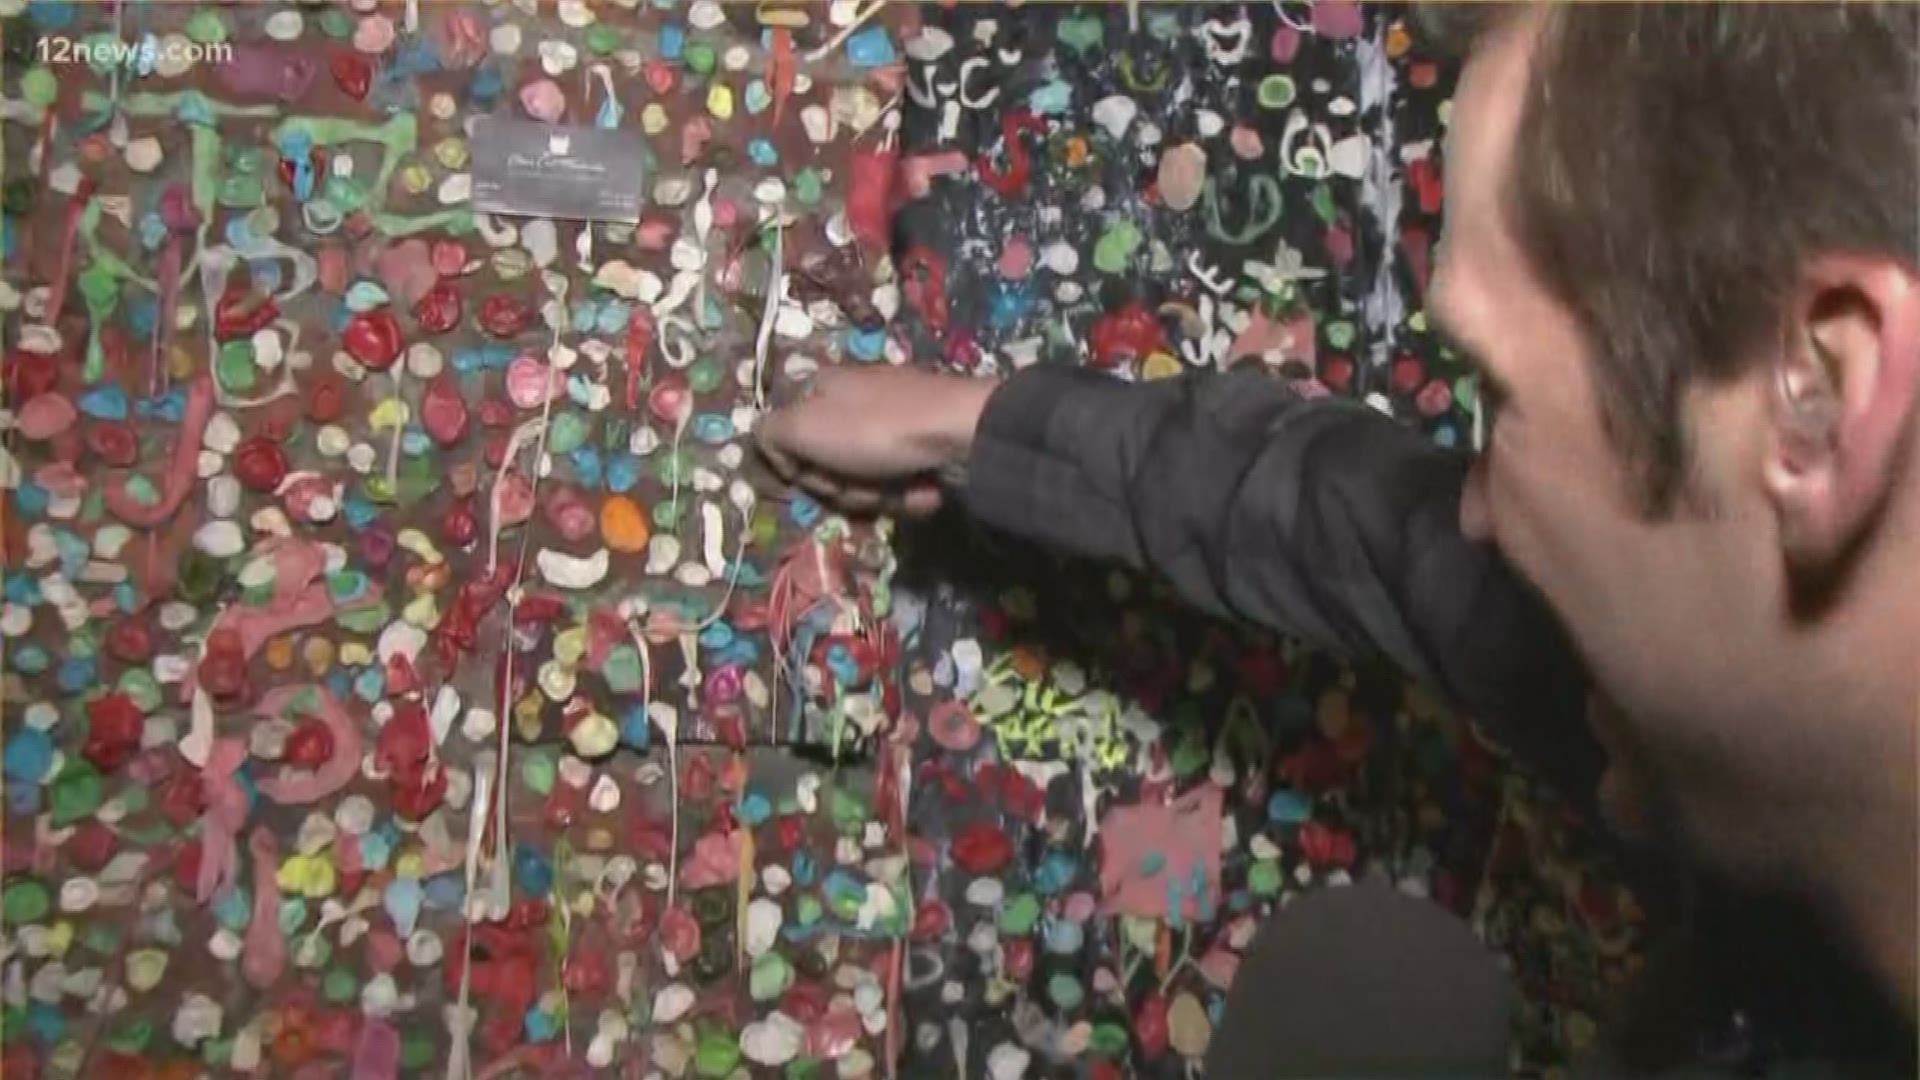 Paul leaves a memento on Seattle's famous Gum Wall.